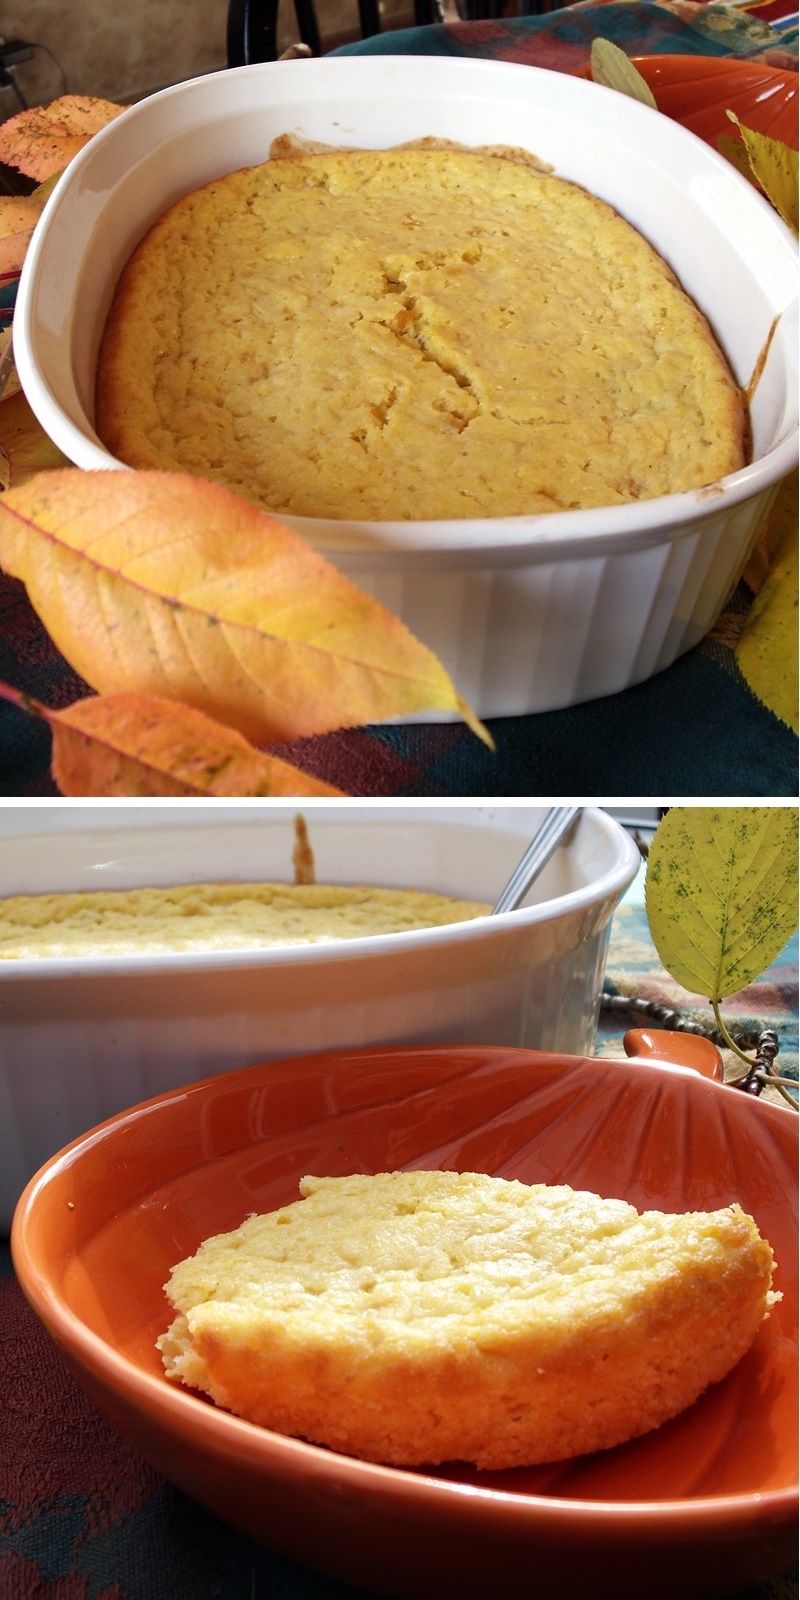 Easy 4-Ingredient Corn Pudding that can be made in almost anyone's kitchen! A perfect dairy-free side dish recipe for Thanksgiving